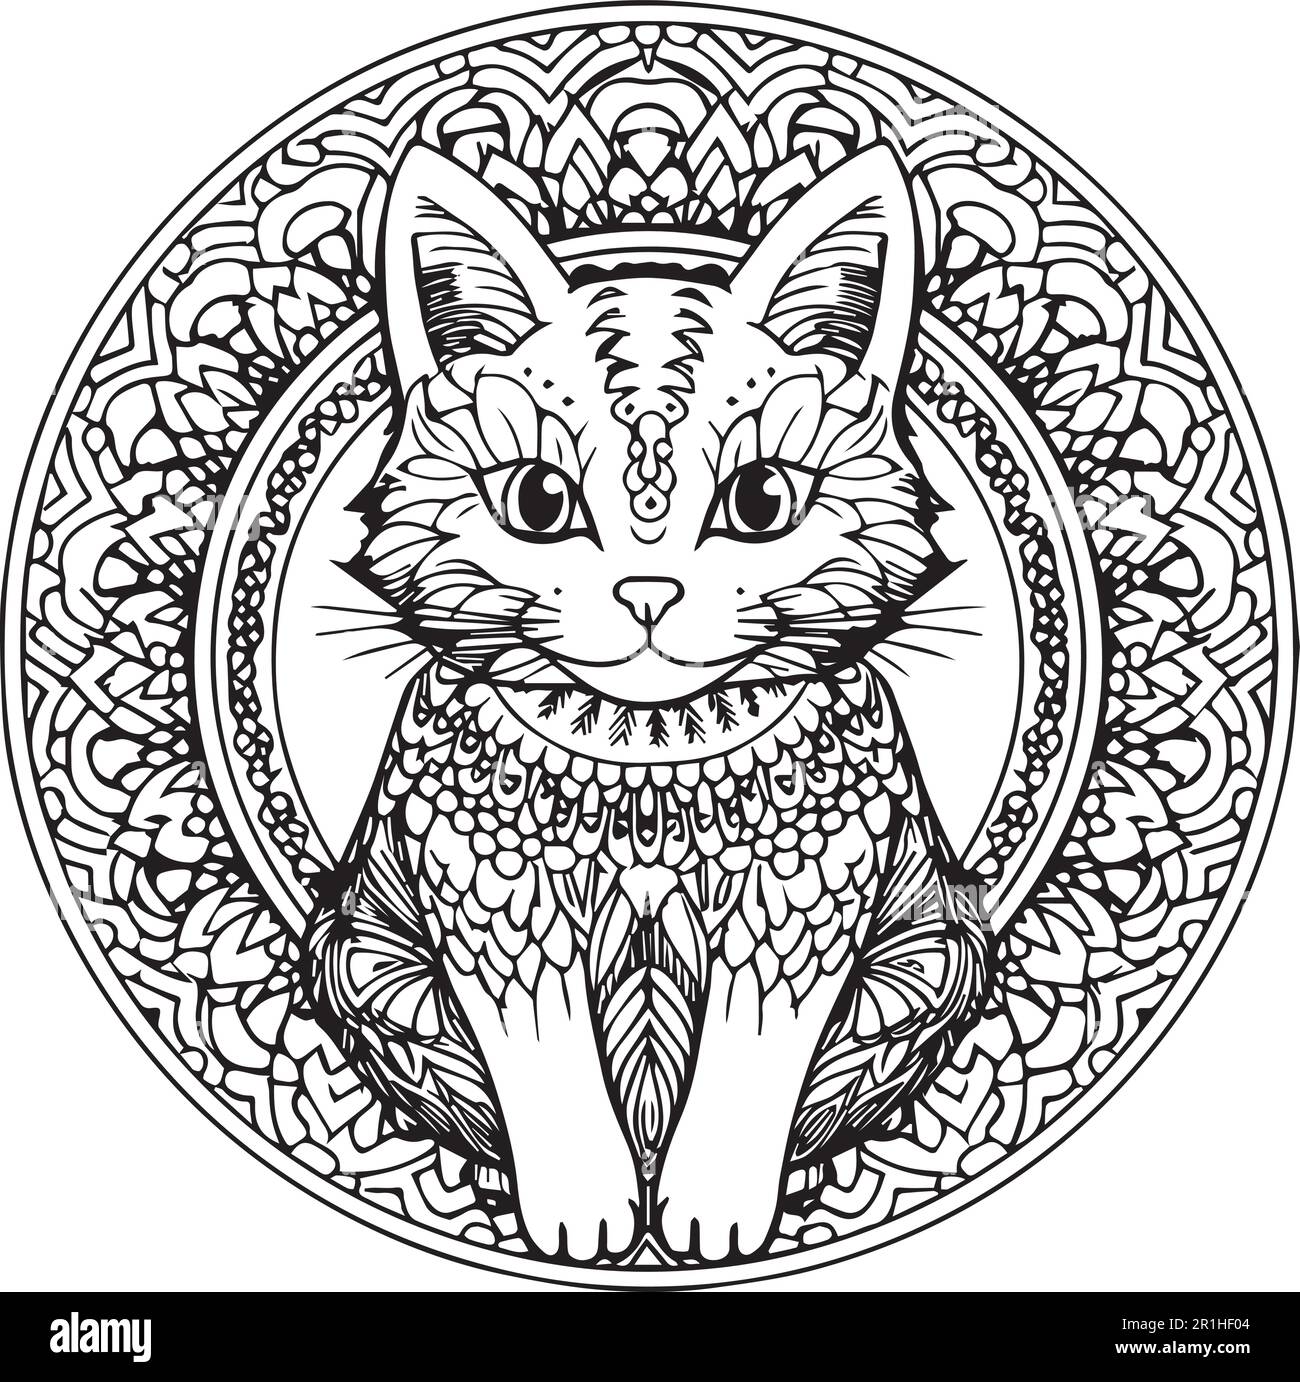 A mandala ginger cat coloring page for adults. Stock Vector